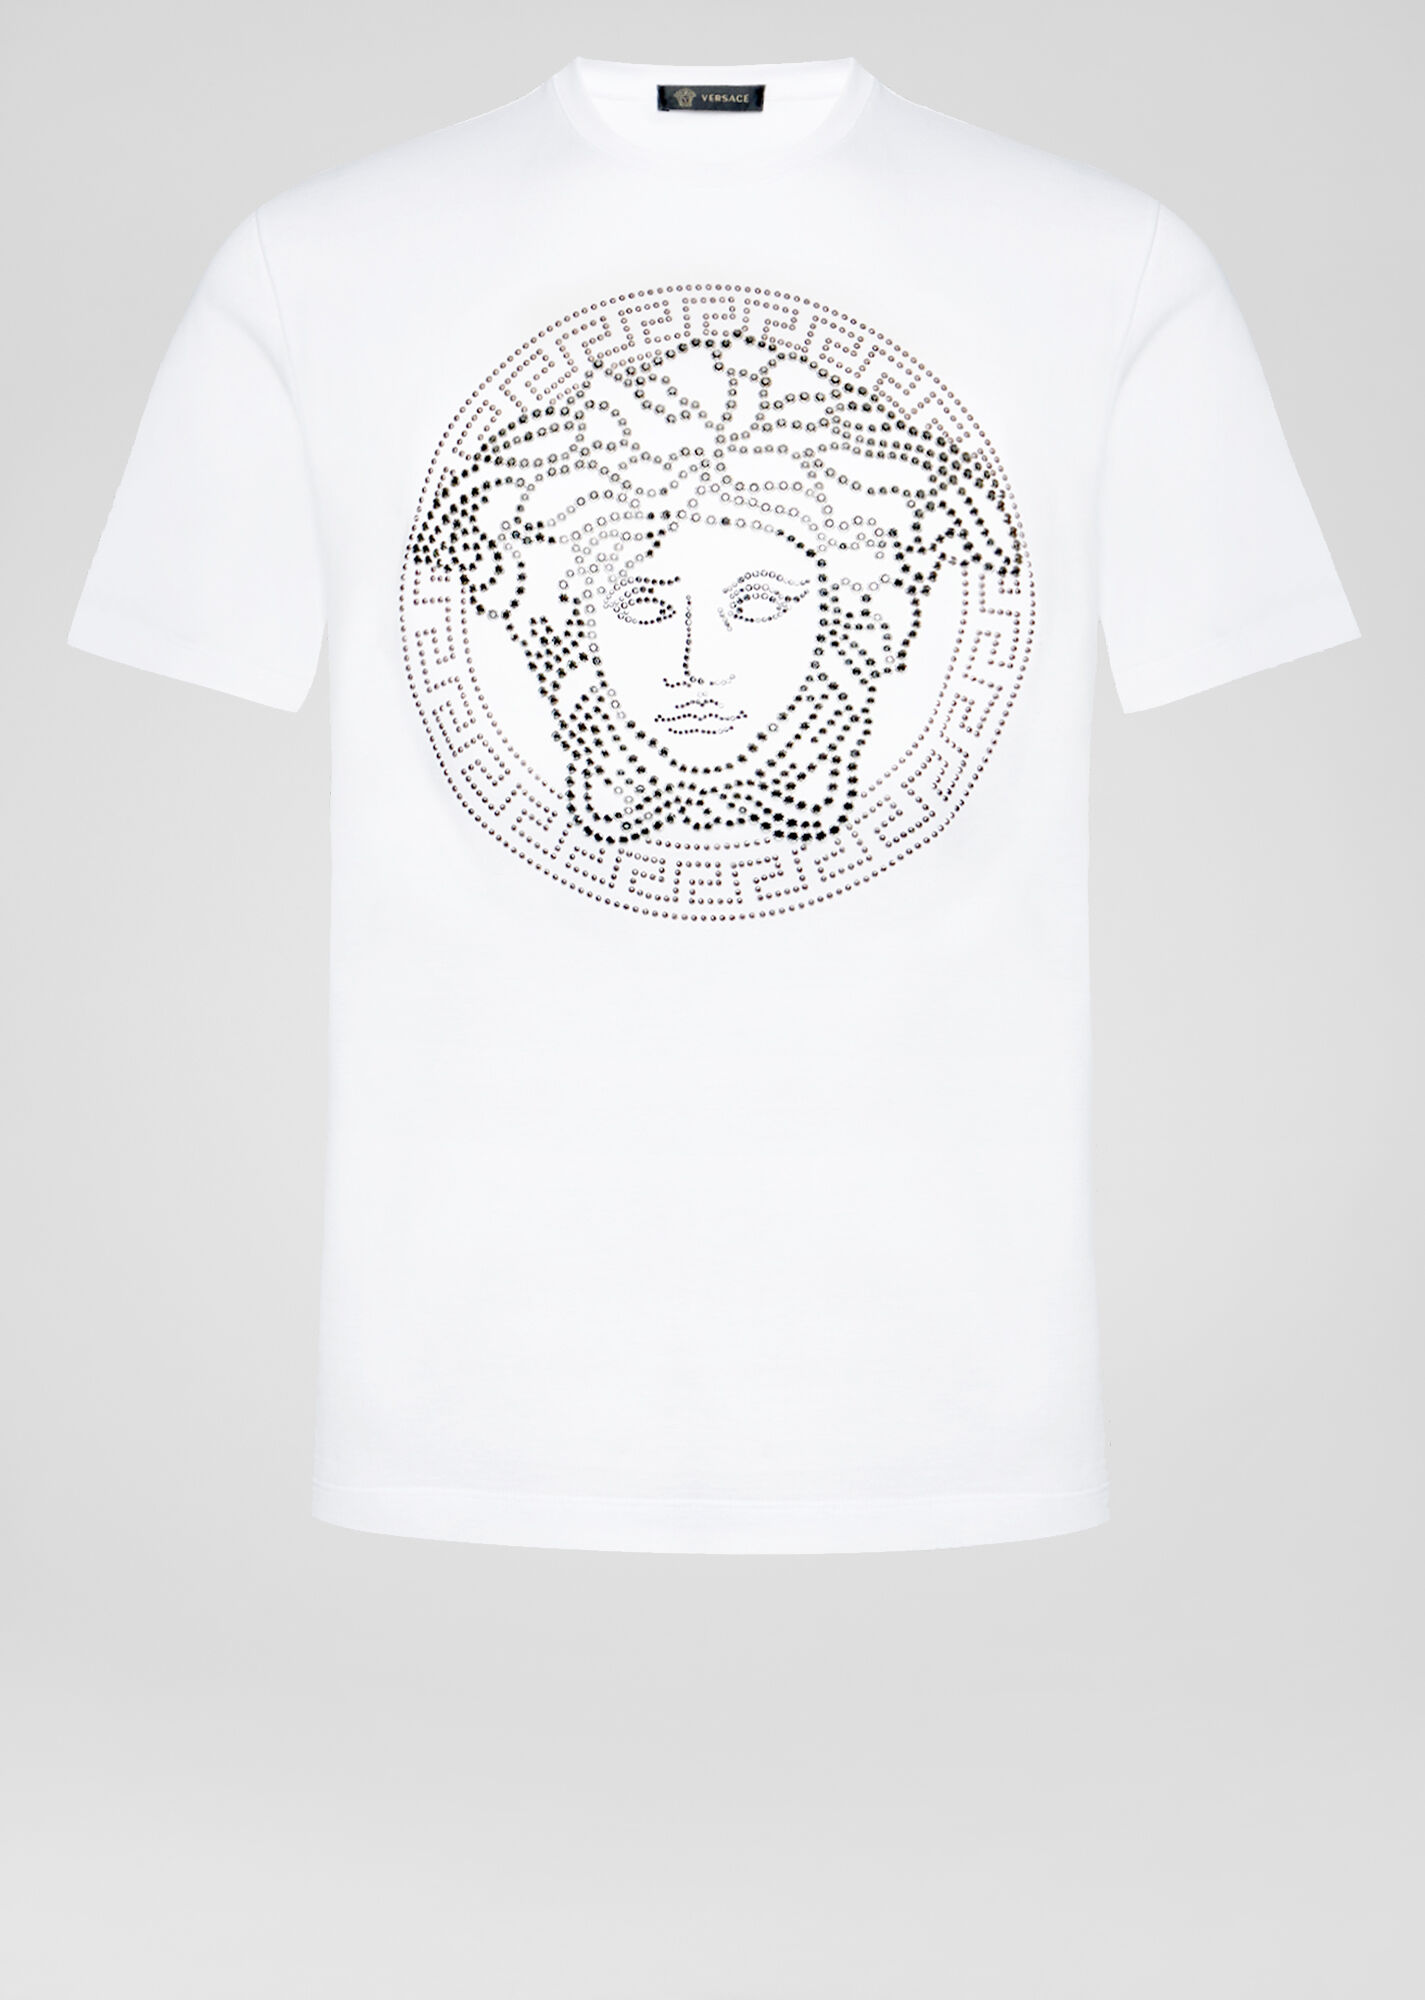 versace logo shirt 10 free Cliparts | Download images on Clipground 2022